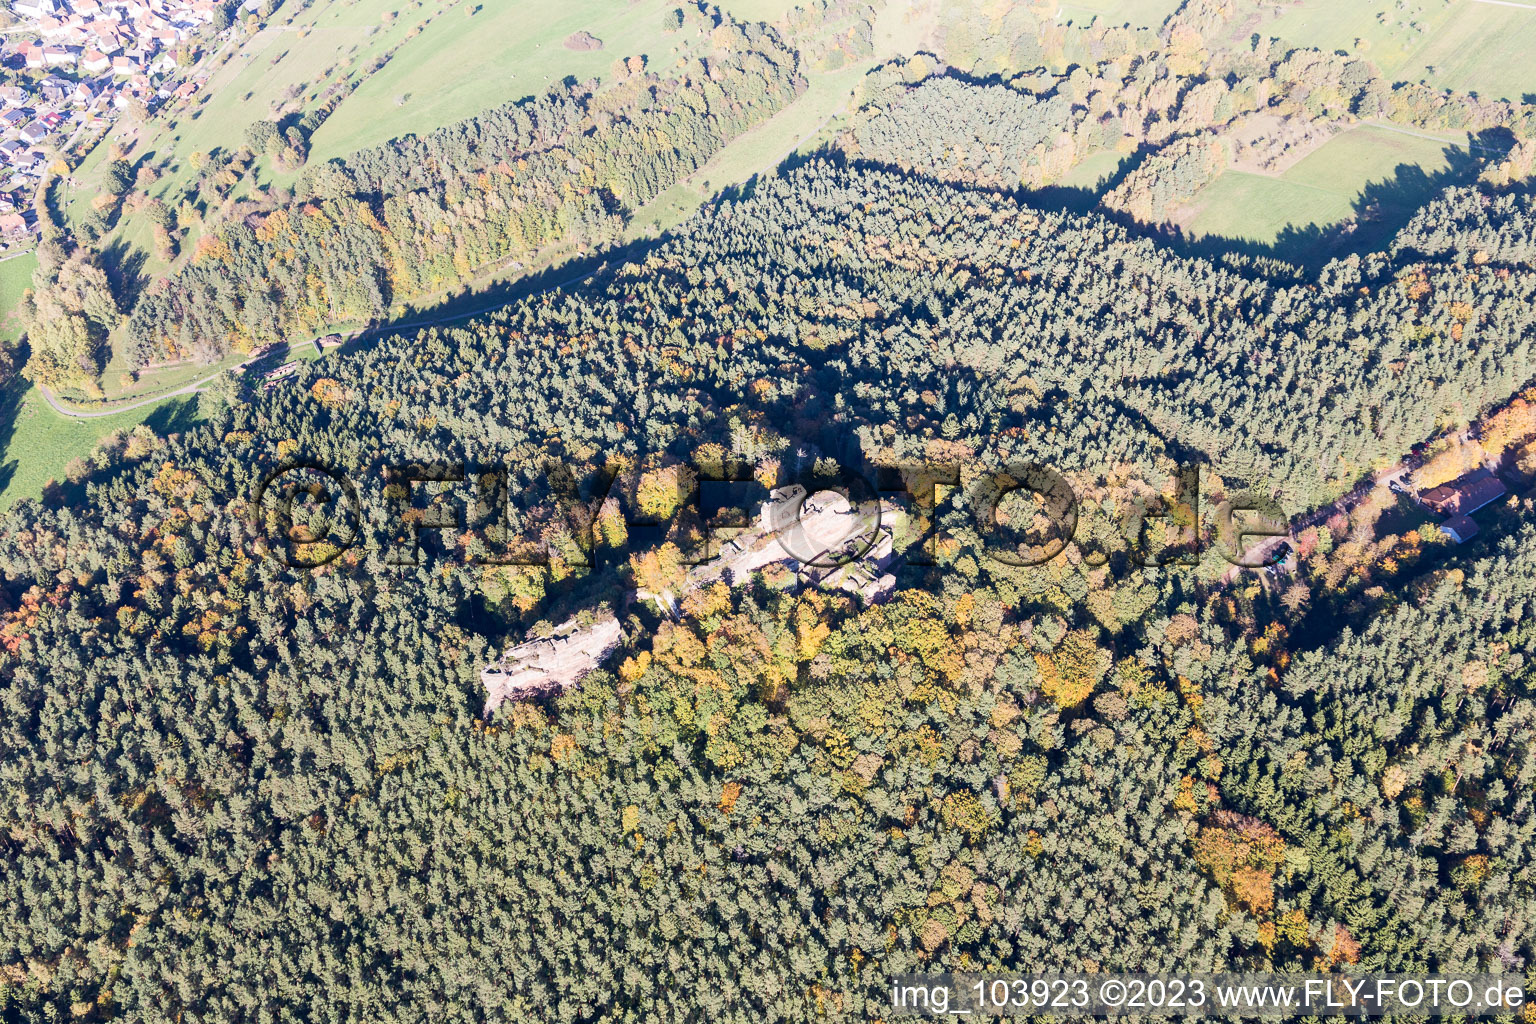 Drachenfels castle ruins in Busenberg in the state Rhineland-Palatinate, Germany seen from above